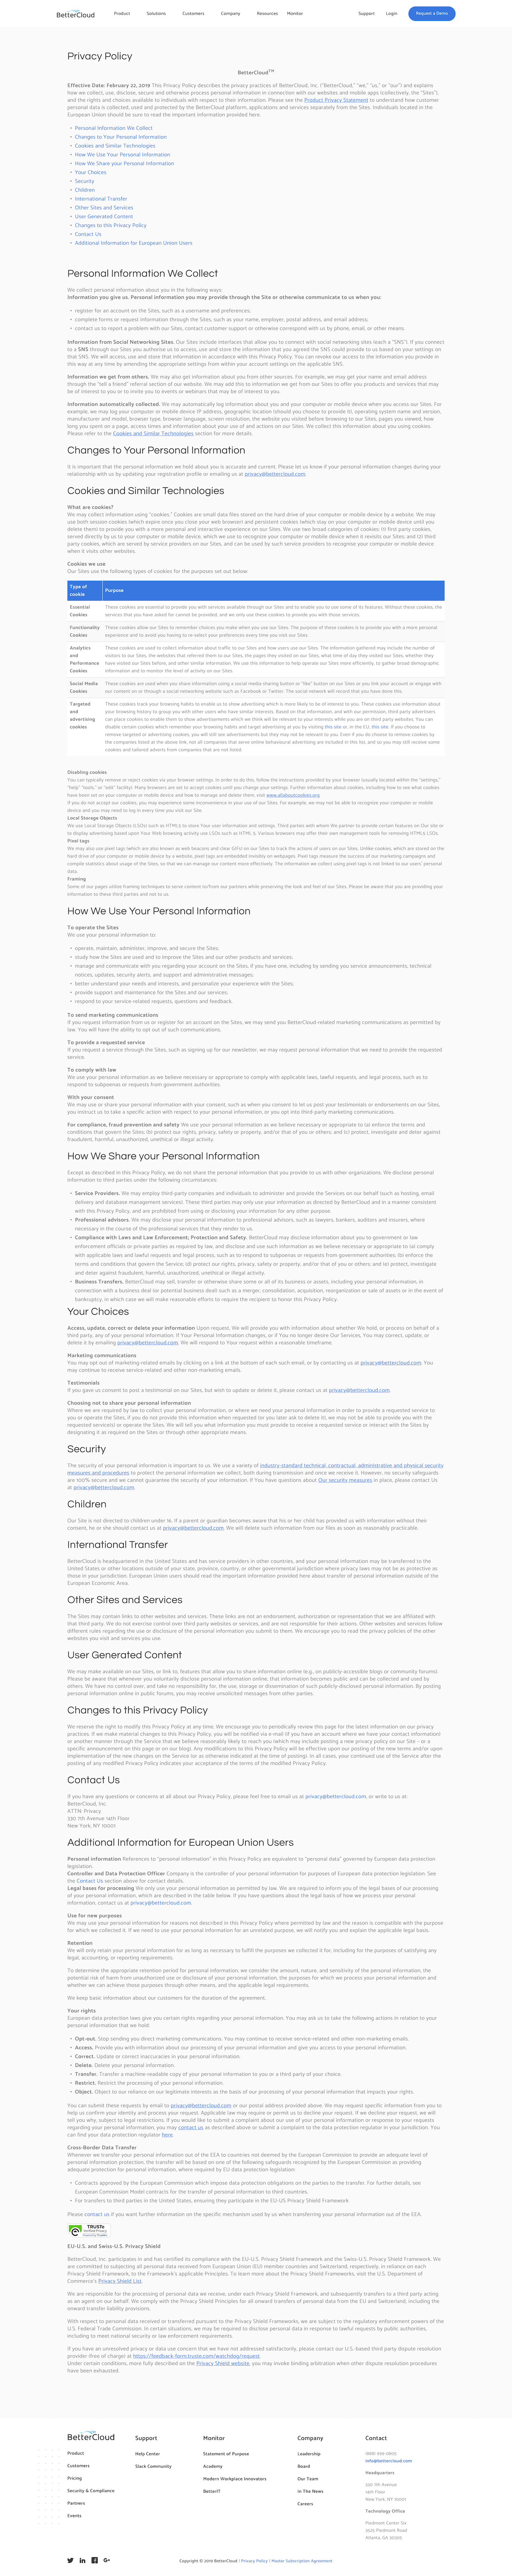 Screenshot of the Privacy Policy page from the Better Cloud website.